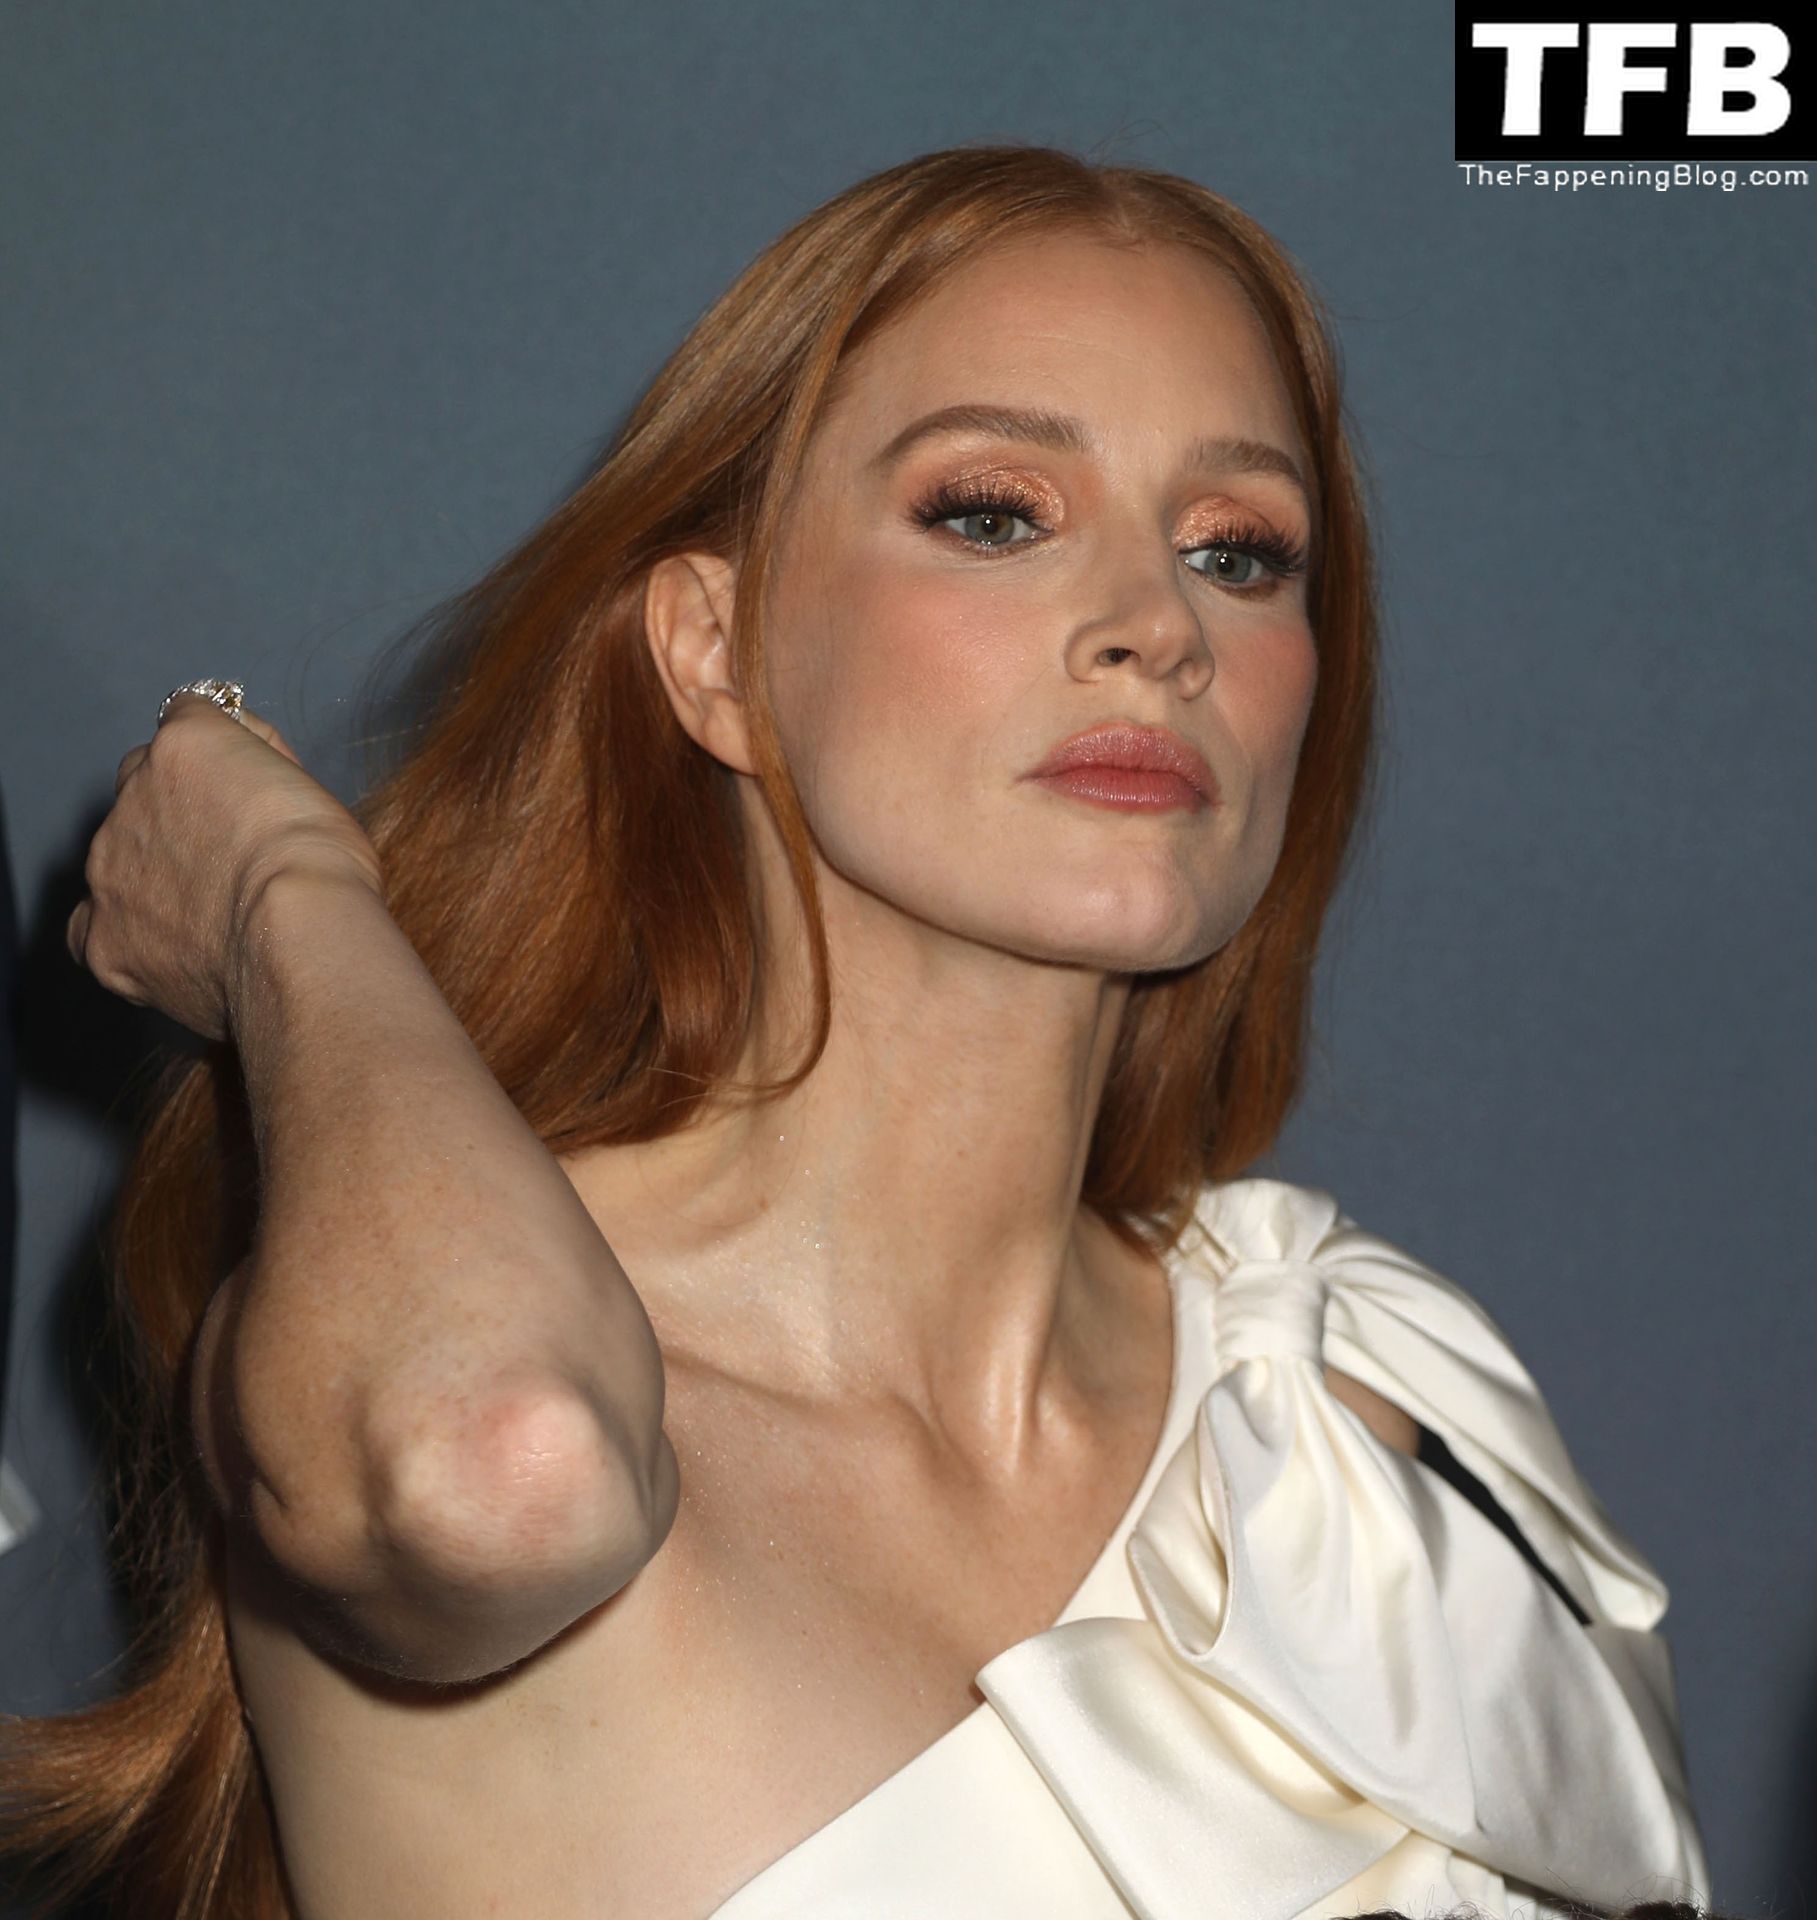 Jessica-Chastain-Sexy-The-Fappening-Blog-55-1.jpg